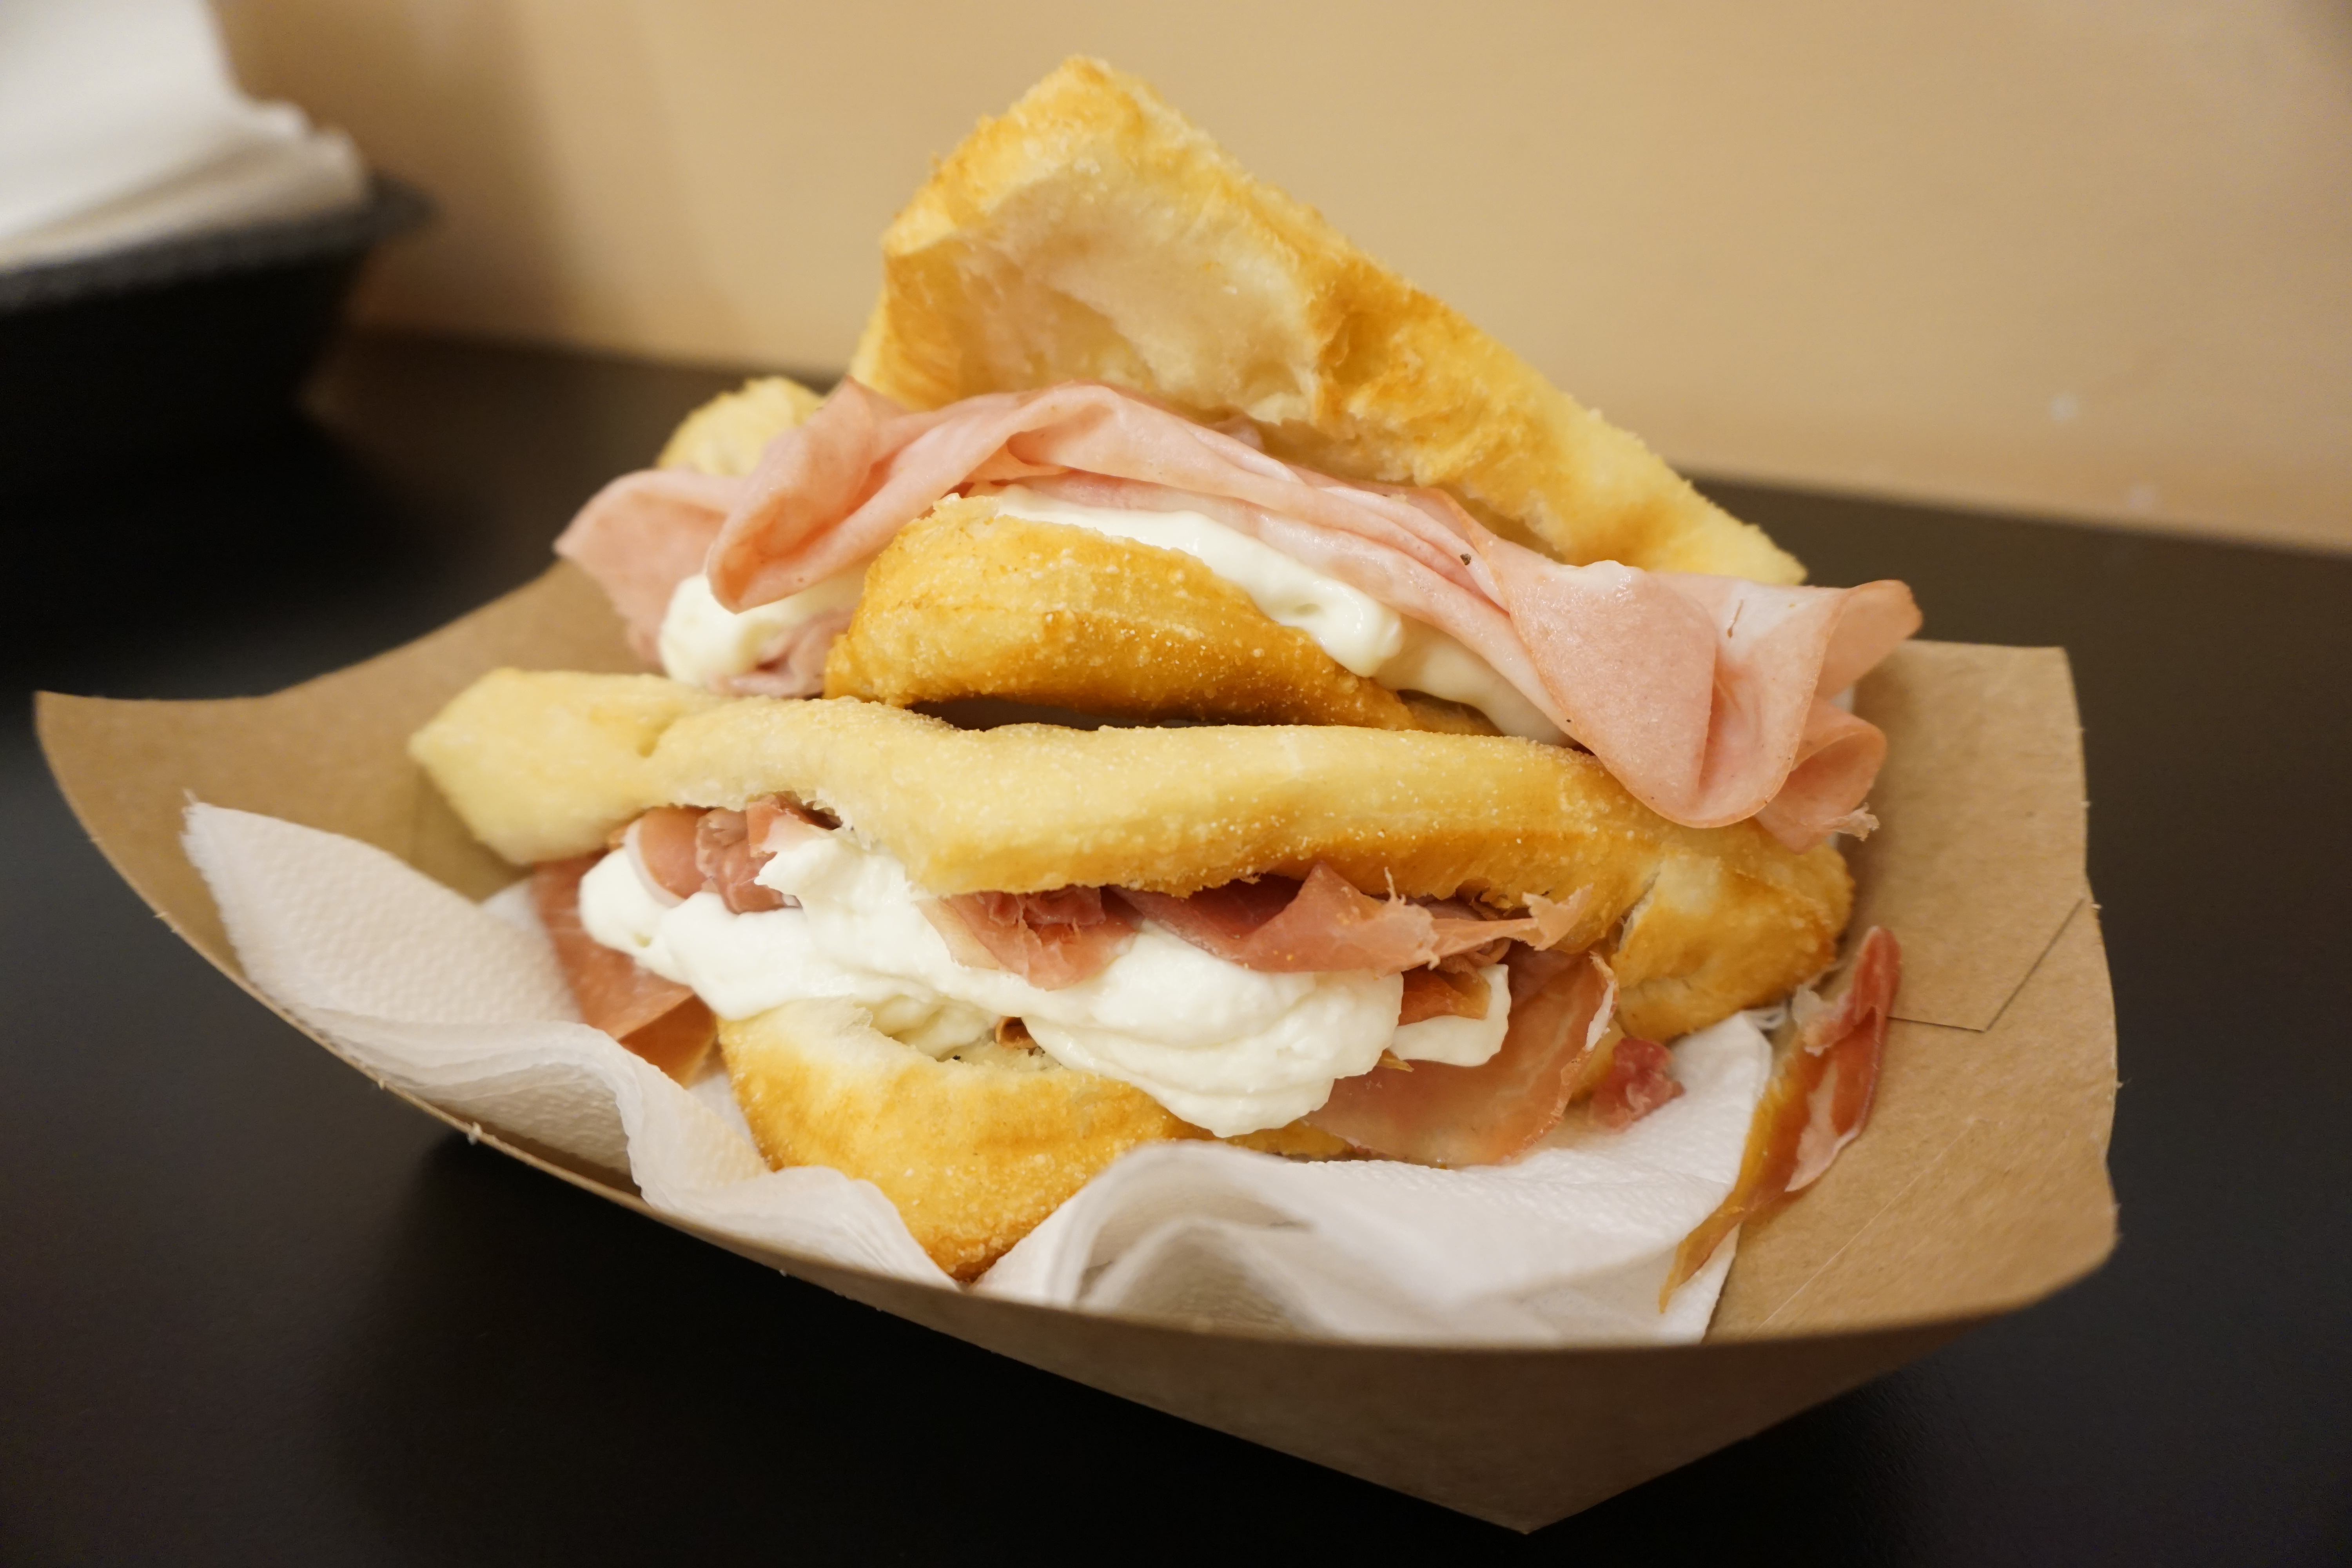 Two sandwiches stacked on top of each other with meat and cheese fillings spilling out, served in a paper boat.